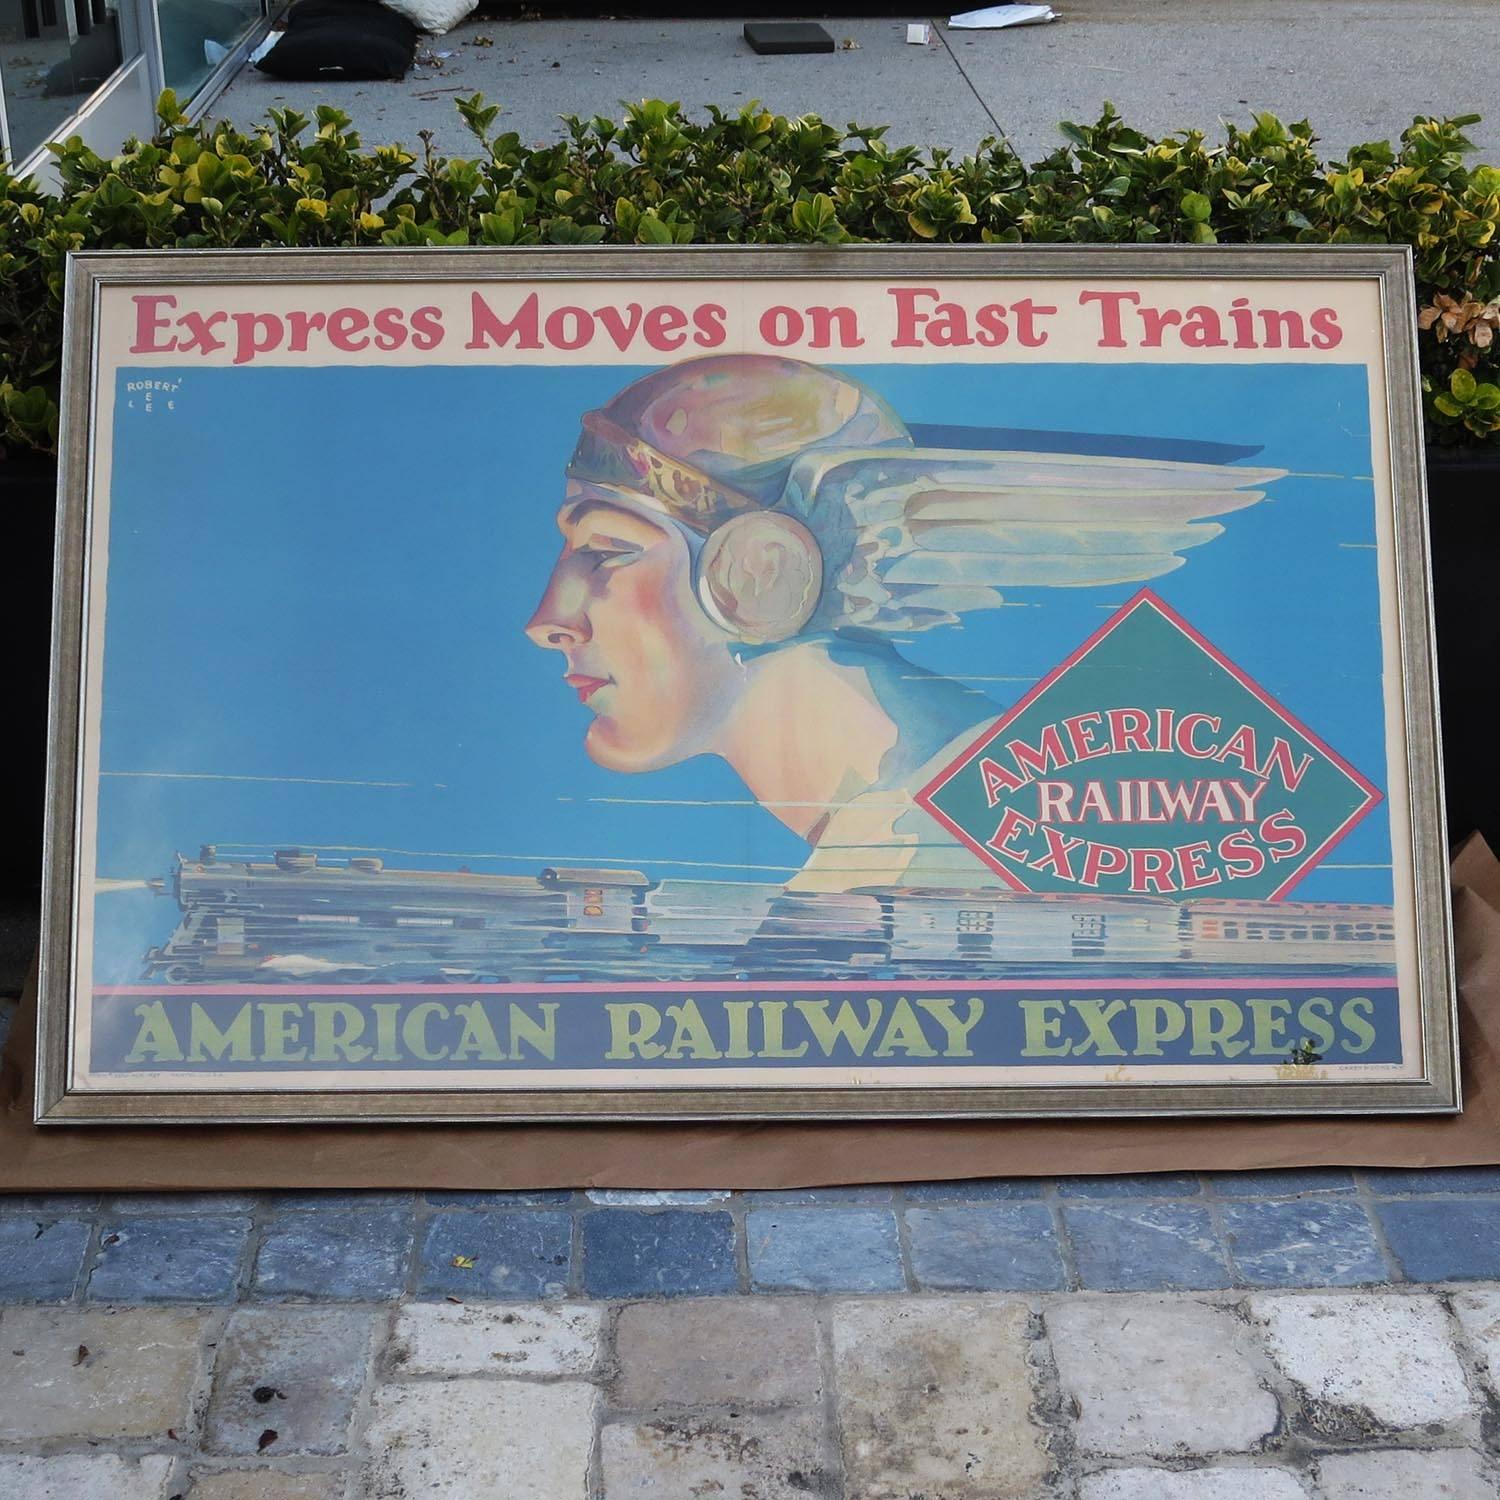 This wonderful image, dated 1927, was a promotion for American Railway Express trains. The poster features a speeding streamliner train, imposed over a profile of a winged Mercury. Printed from graphics by artist Robert E. Lee, the image is colorful